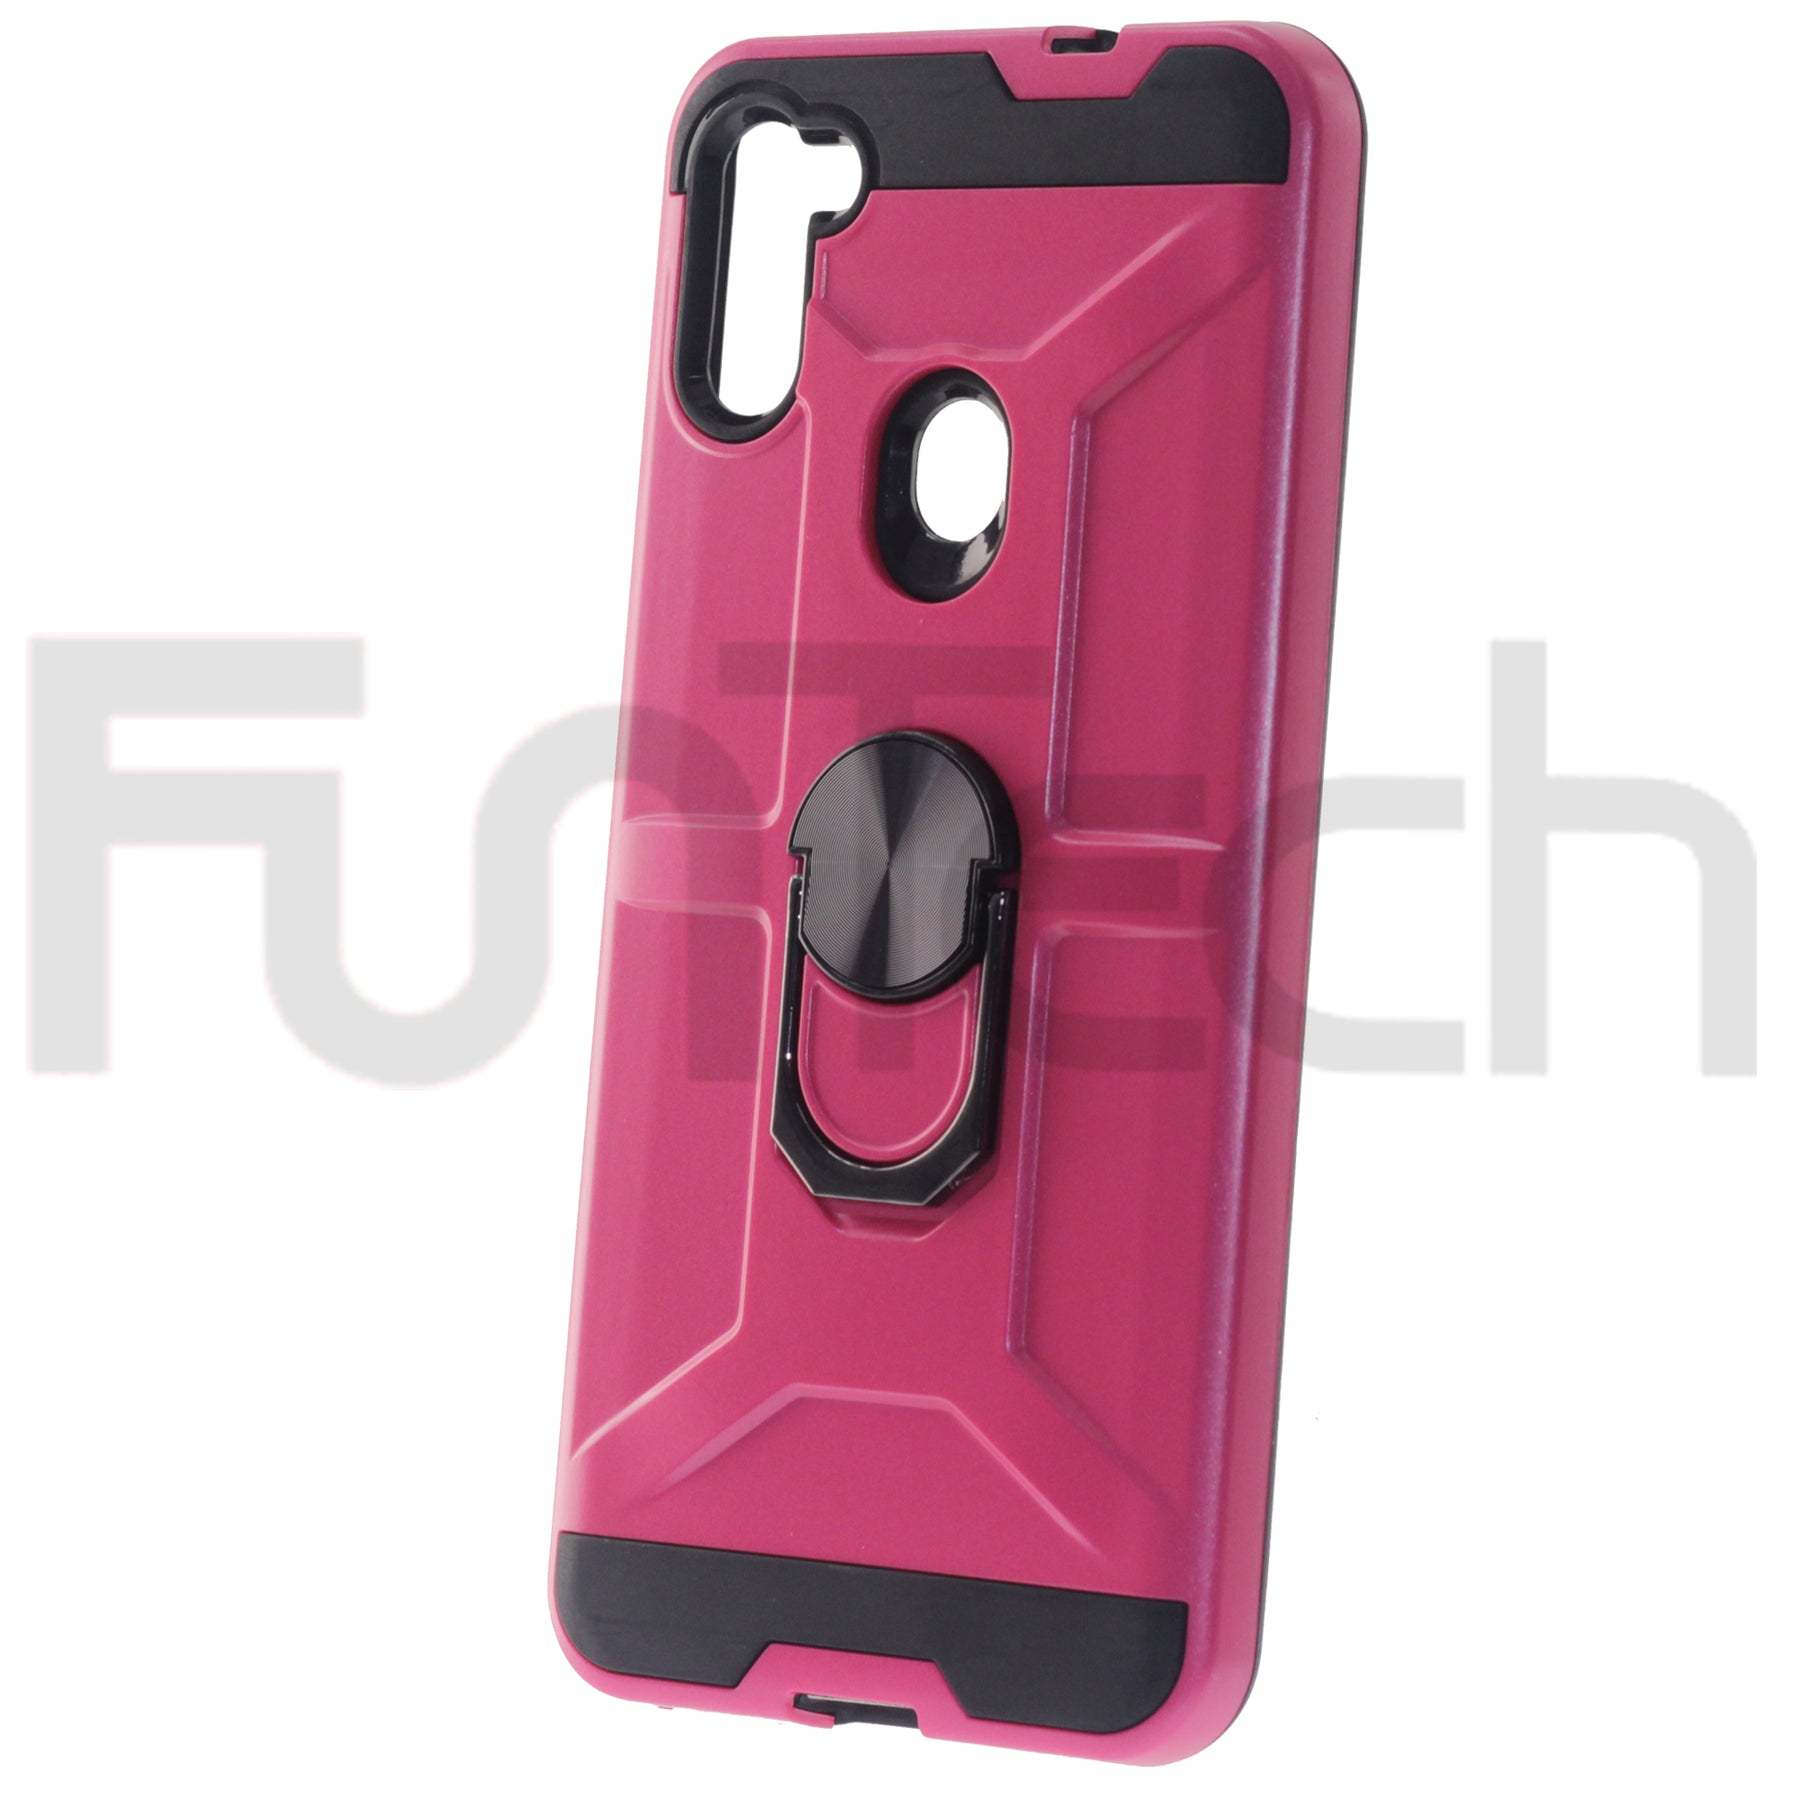 Samsung A11, Ring Armor Case, Color Red.